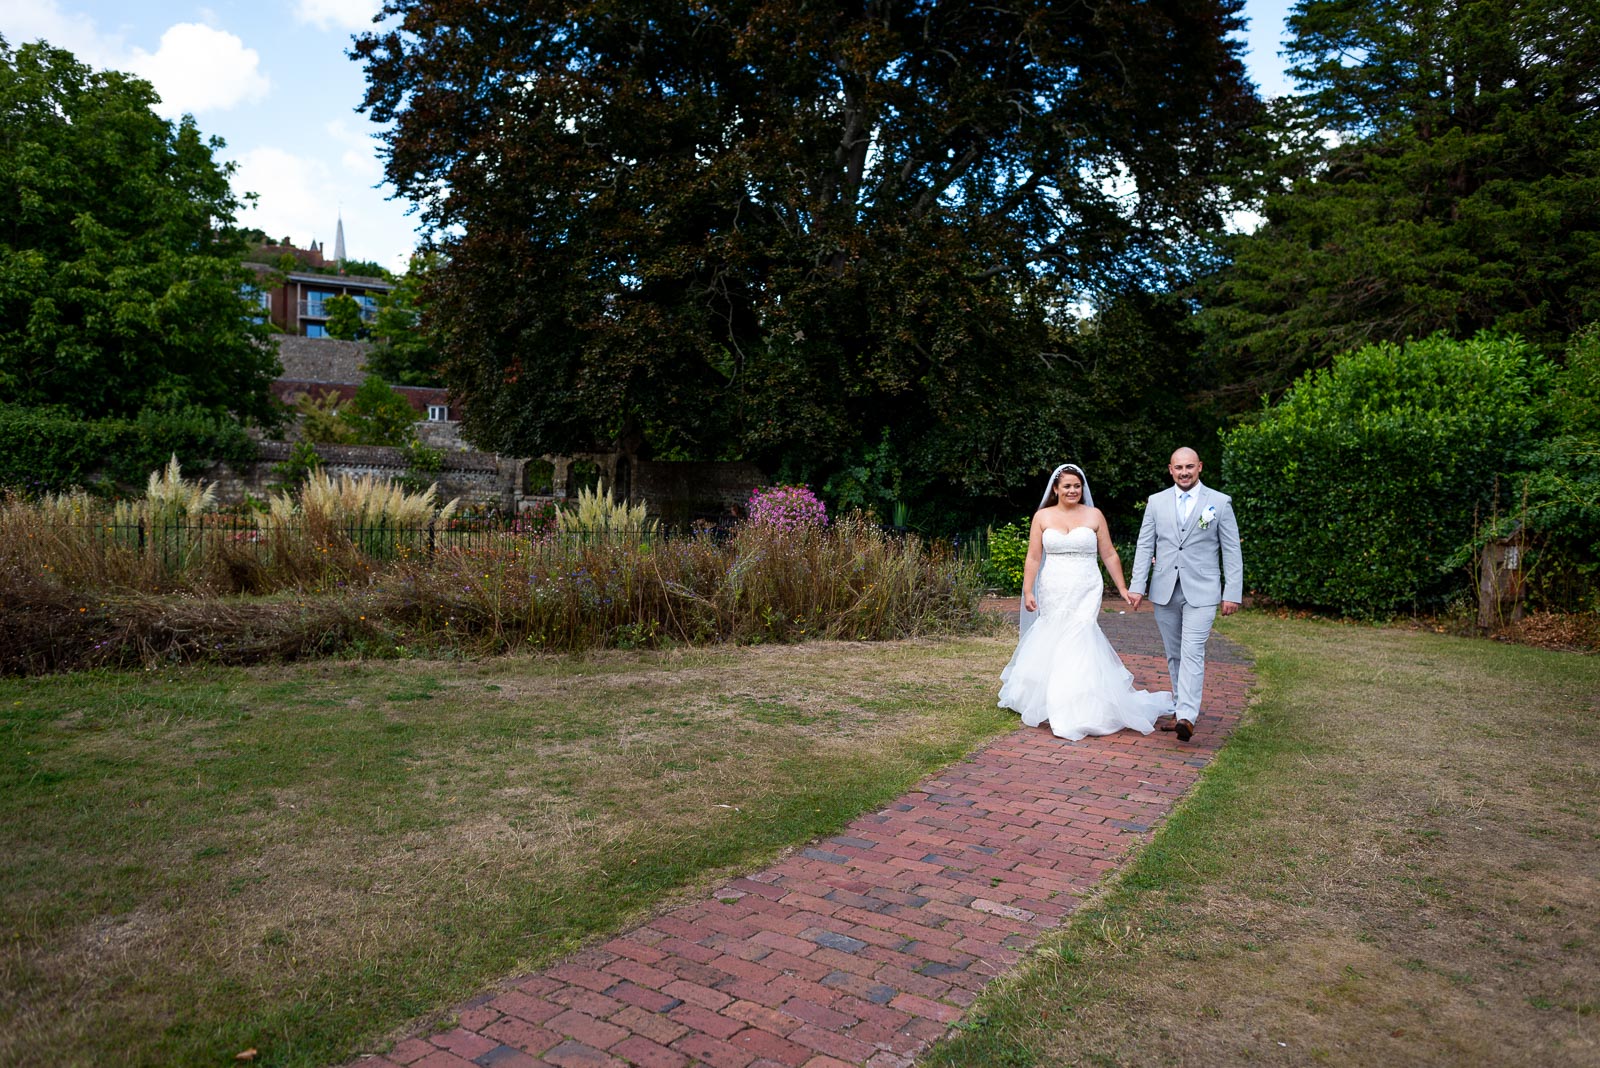 Soraya and Billy walk down a red brick path in Southover Grange, Lewes after their wedding.